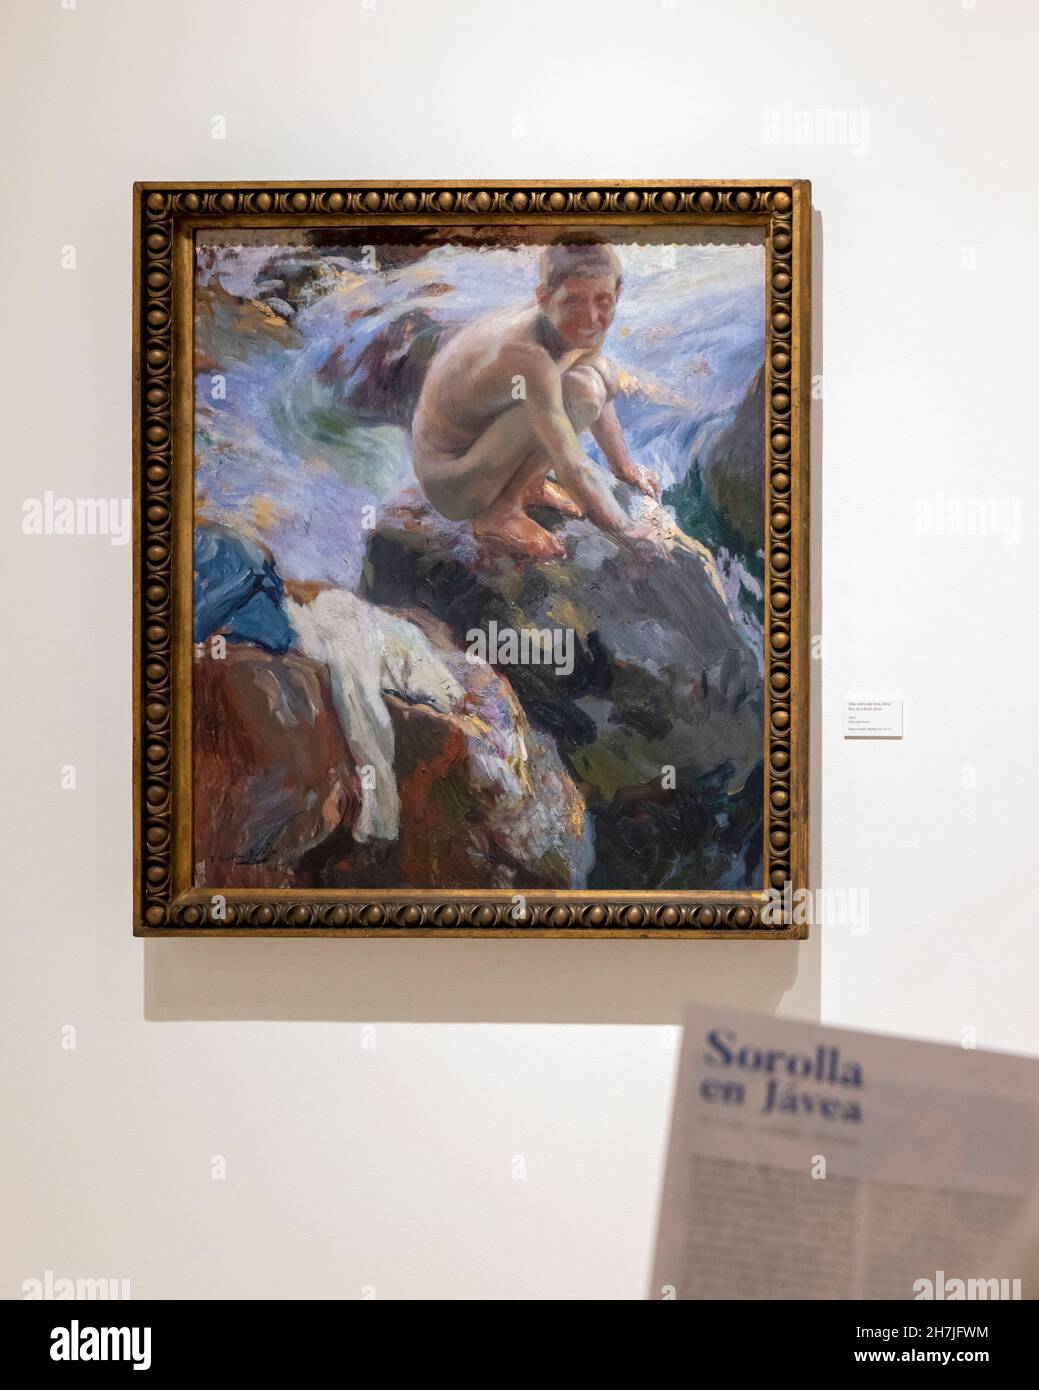 Museum joaquin sorolla painter images stock Alamy - and photography hi-res